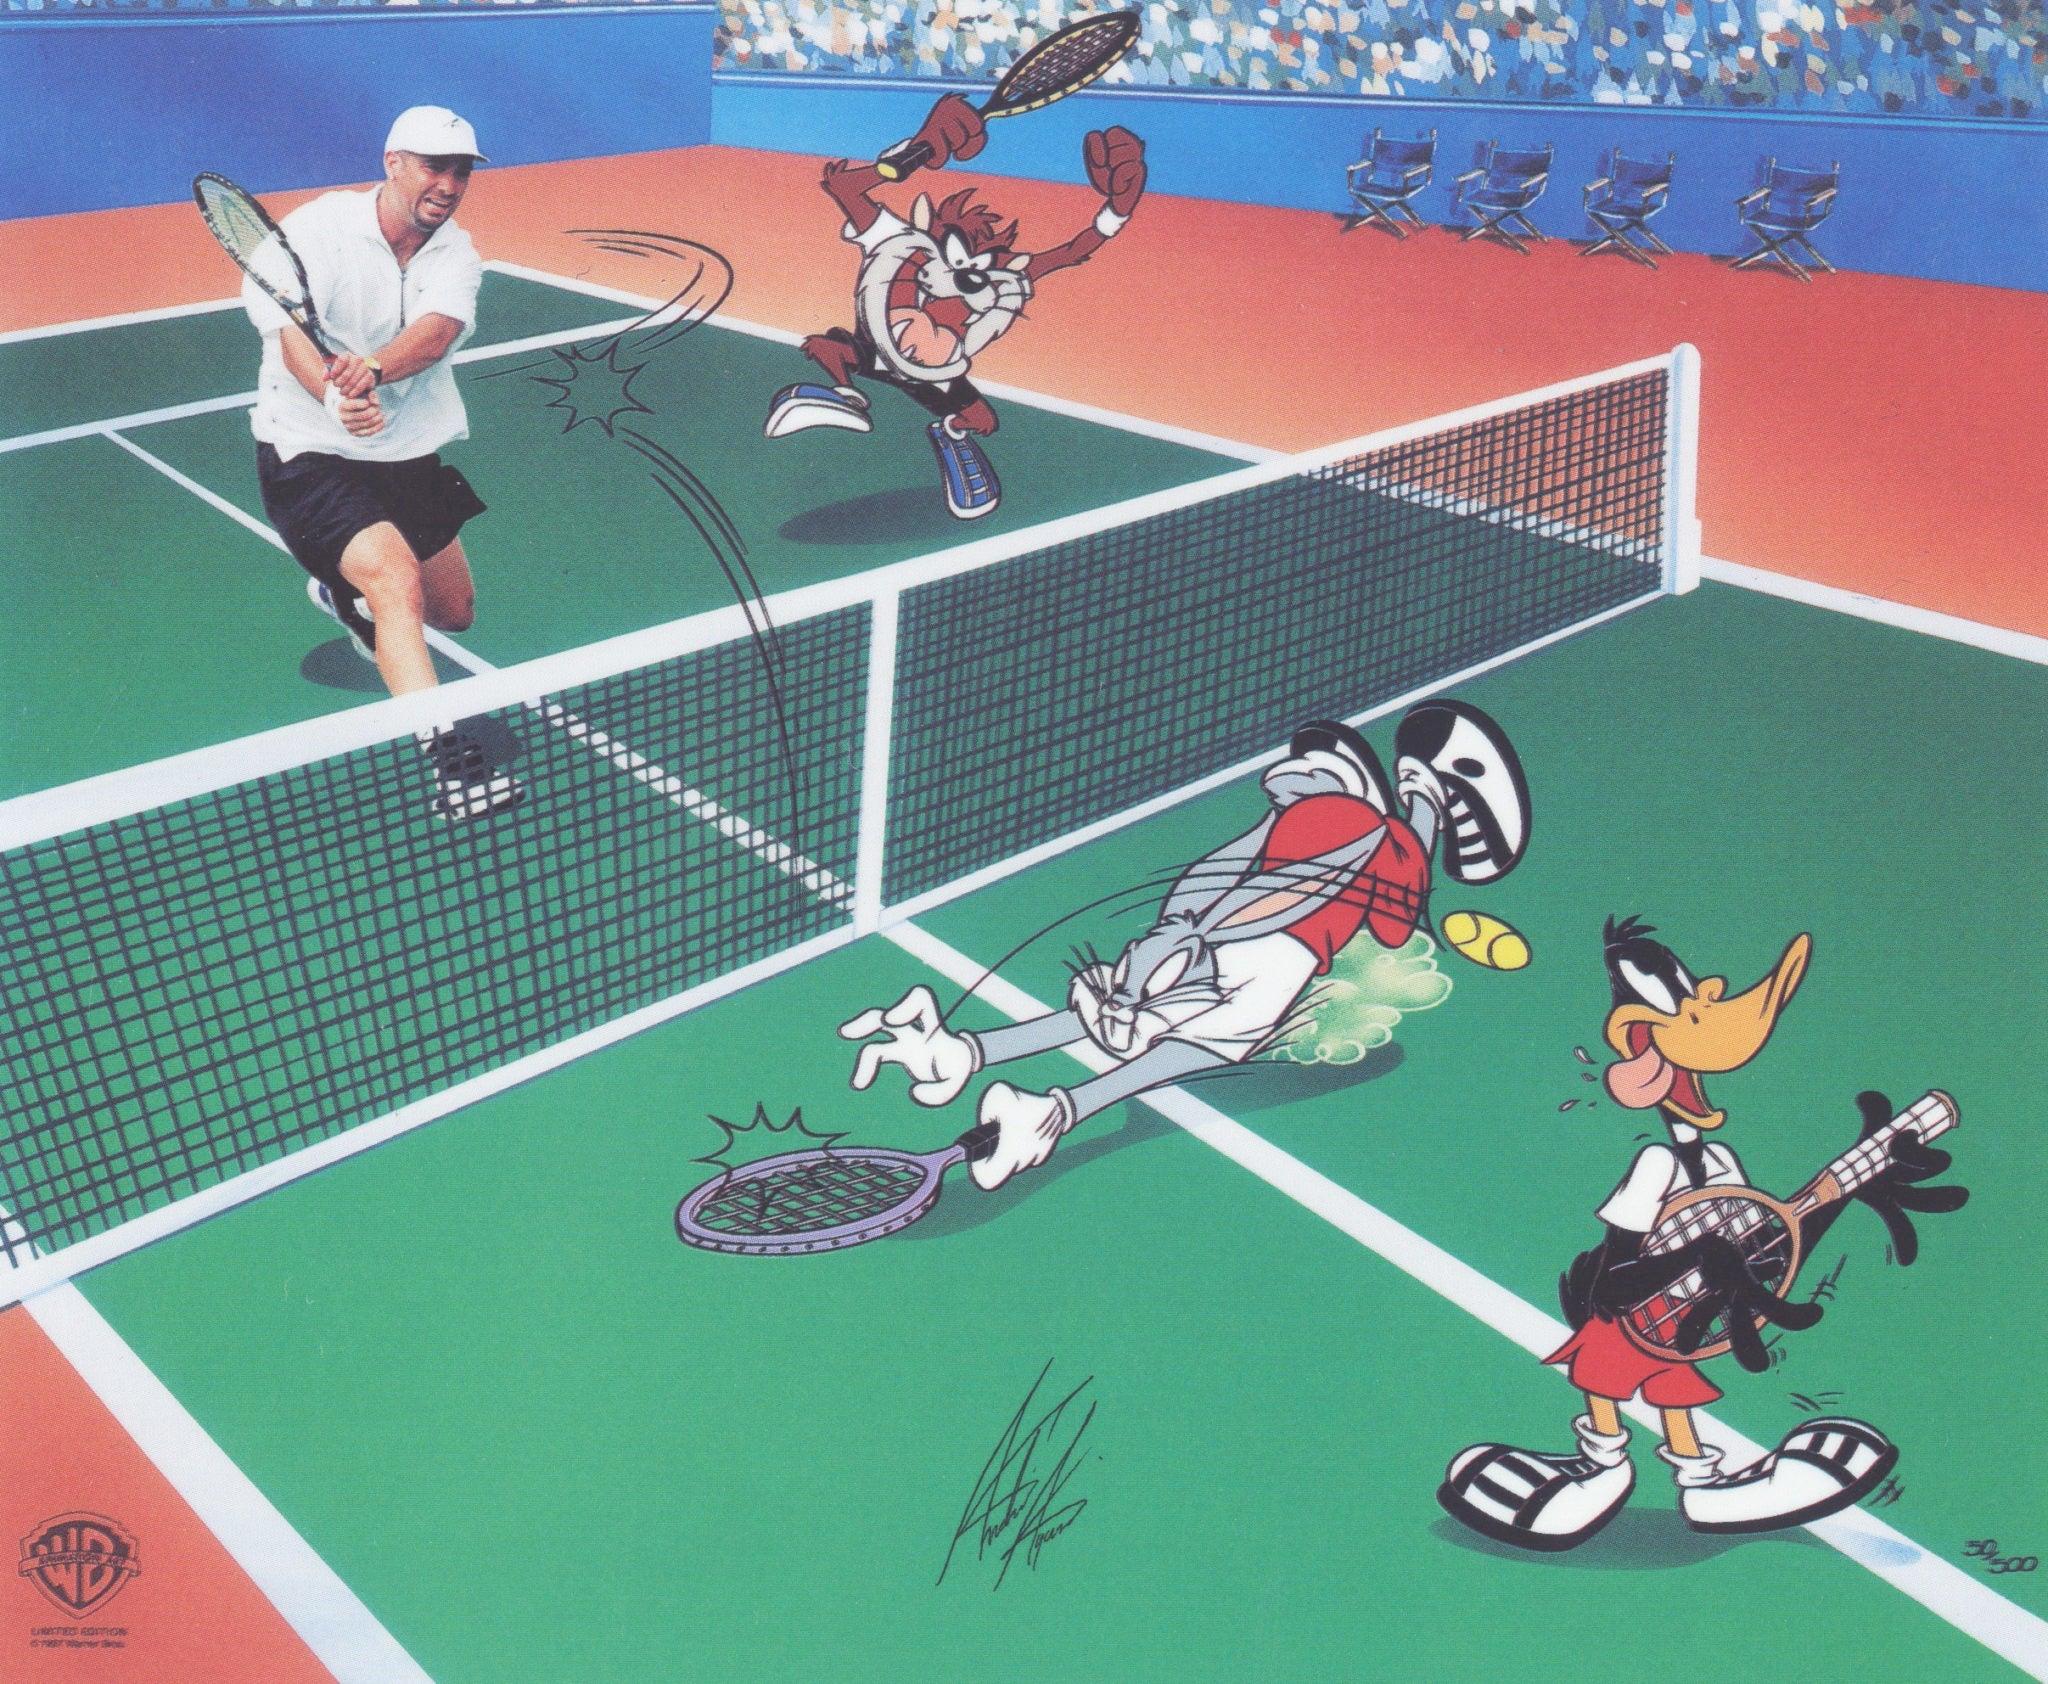 Features the World-Class talent of André Agassi and teammate Taz in a distinctive “mixed-up doubles” competition vs. “That Oscar-winning Rabbit” Bugs Bunny and his slightly distracted partner Daffy Duck.